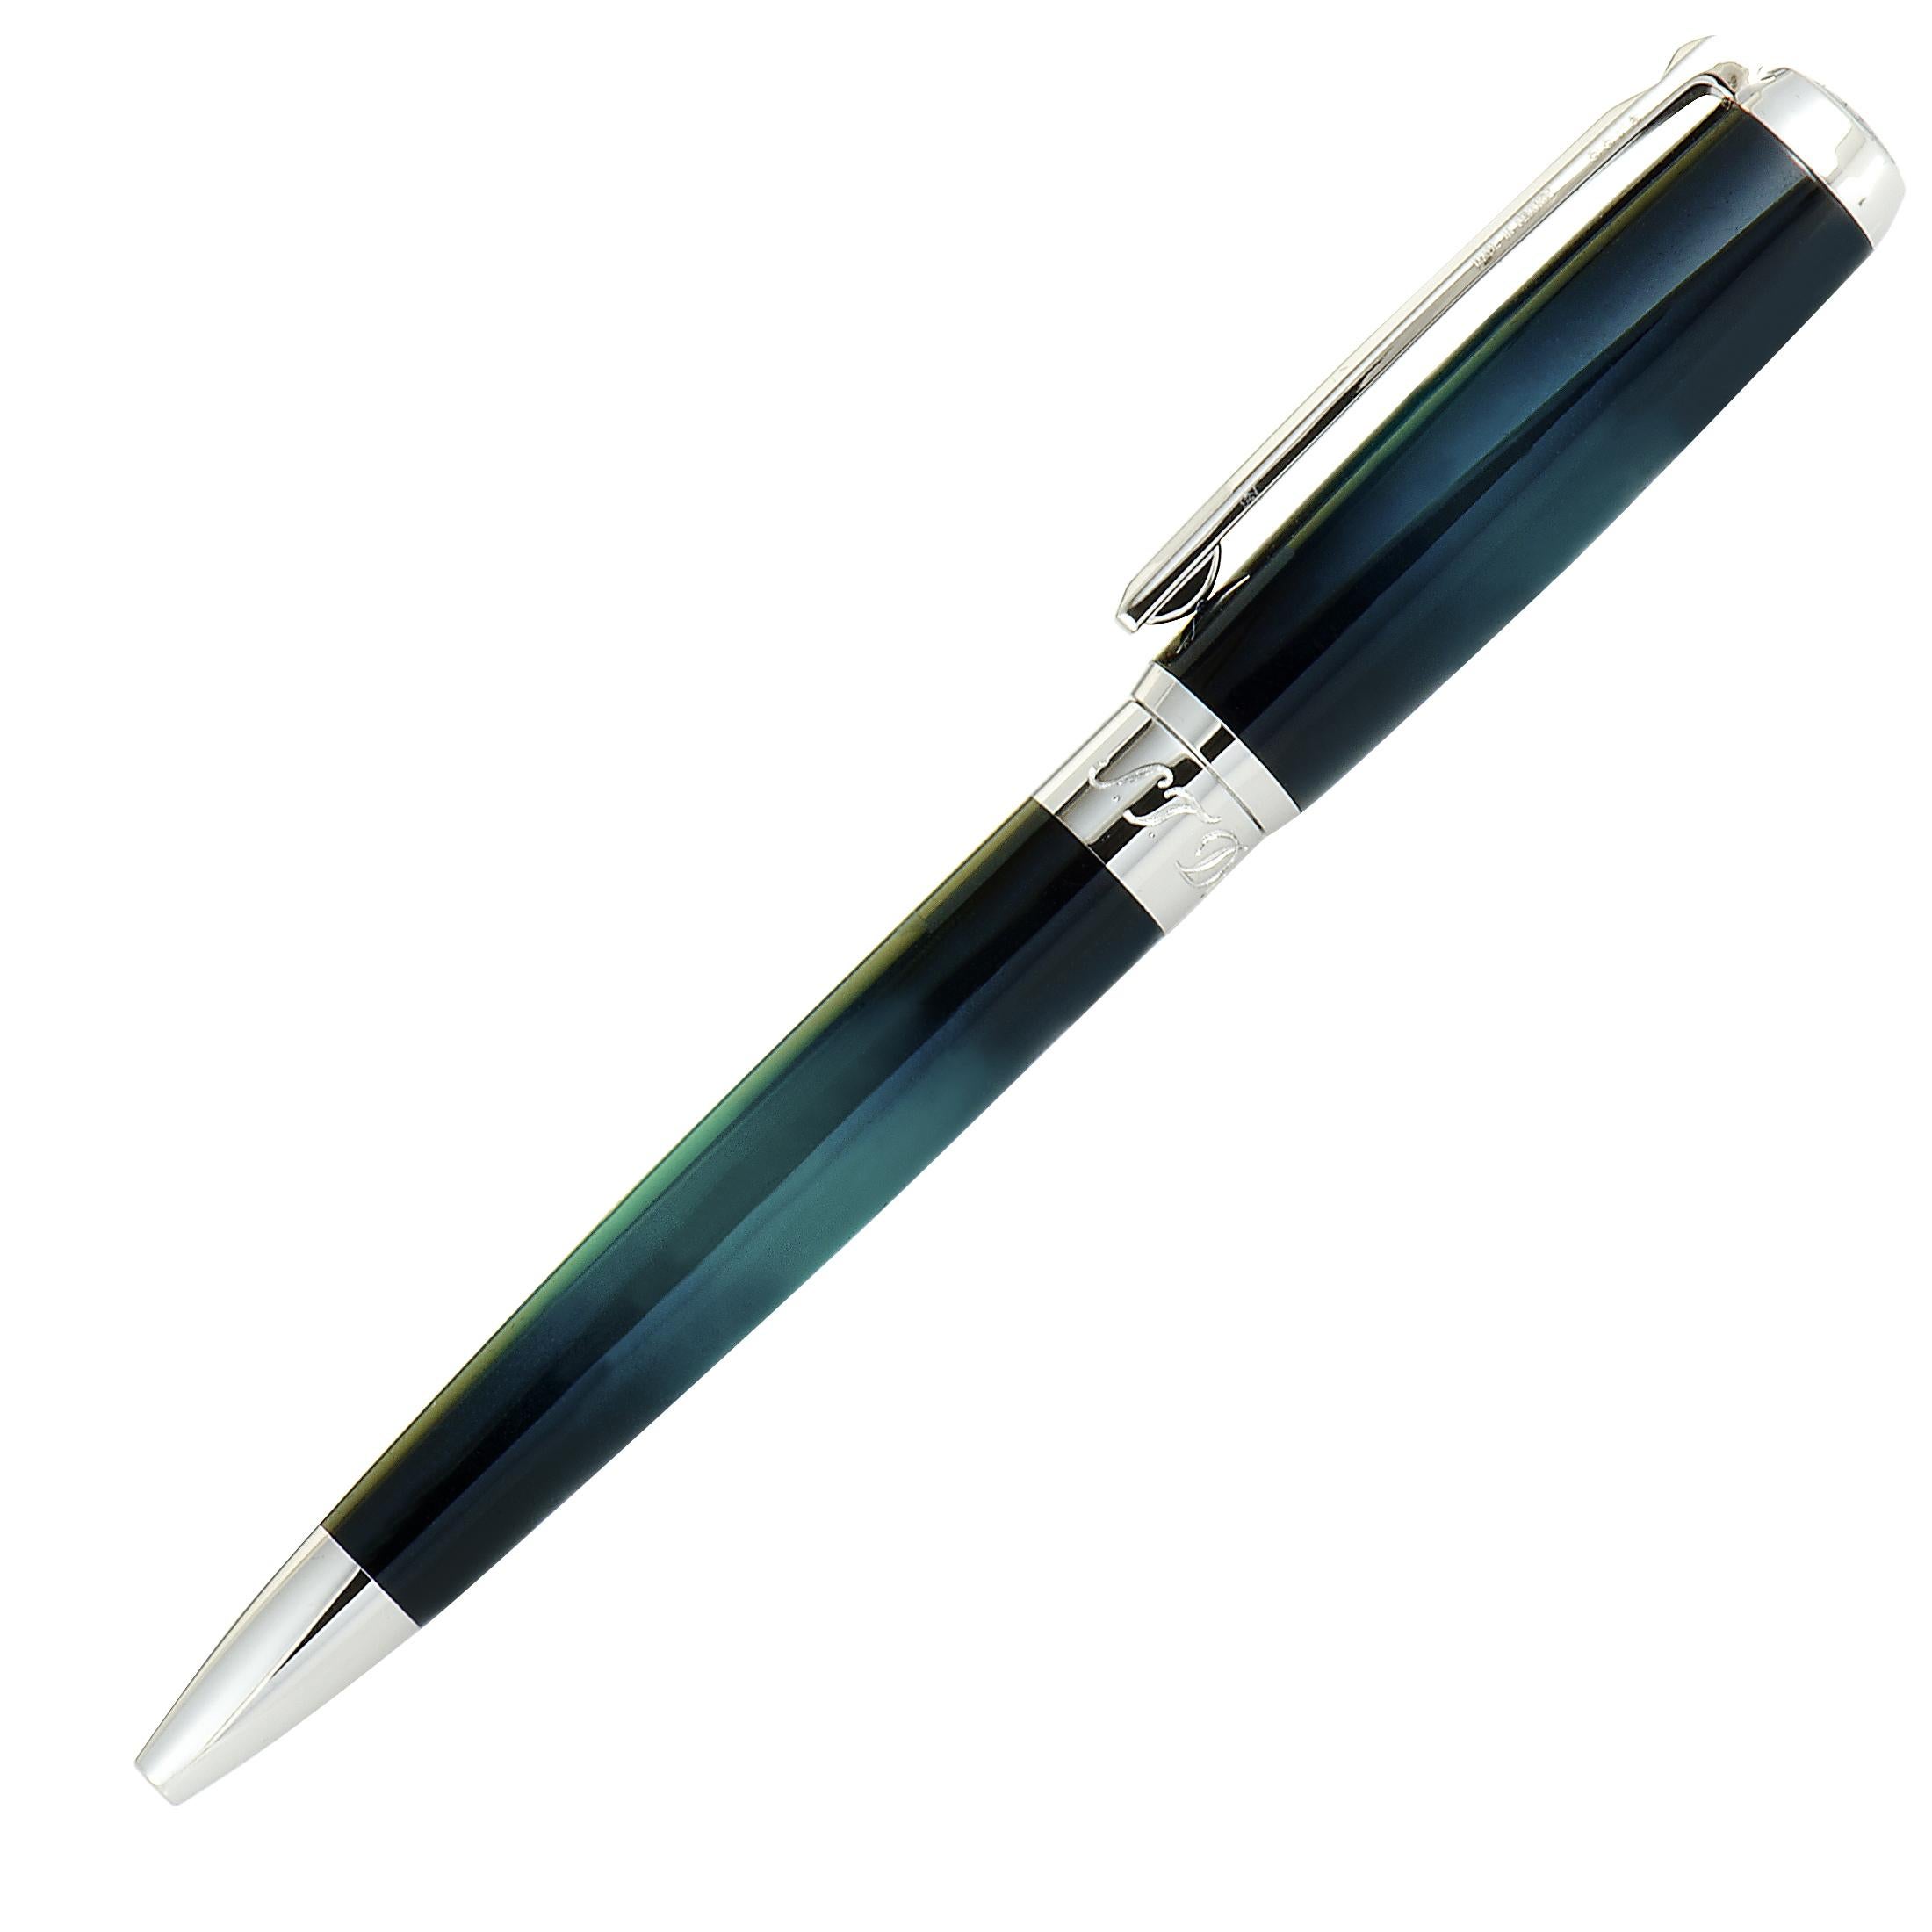 This sleek, elegant ballpoint pen is created by S.T. Dupont for the refined “Line D” line and it compels with its splendidly classic design and attractive sunburst décor.